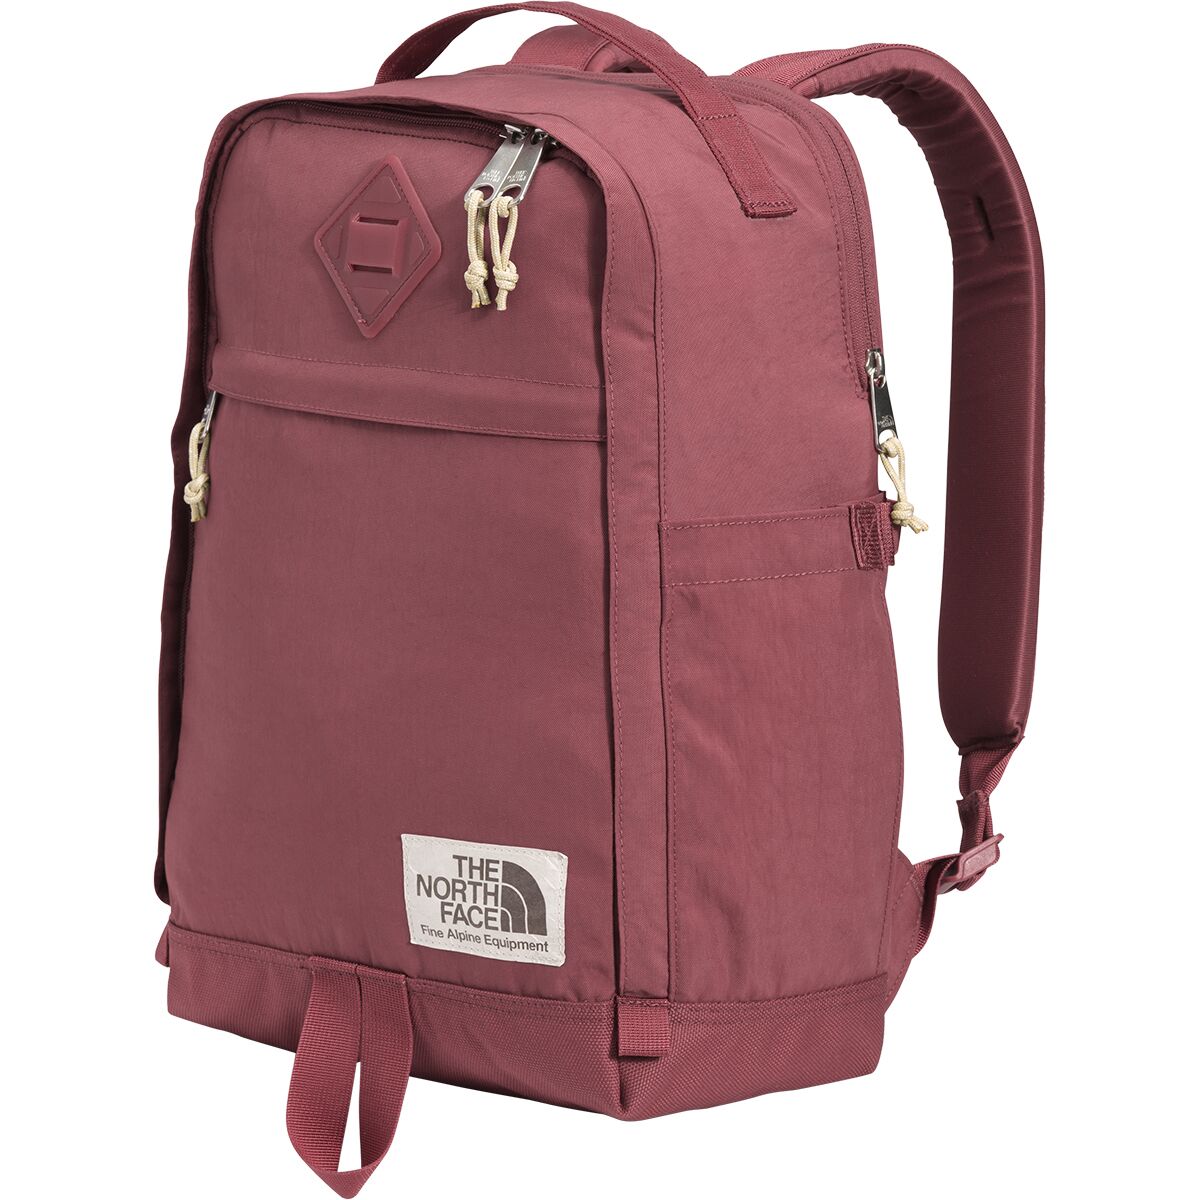 The North Face Berkeley 19L Mini Backpack